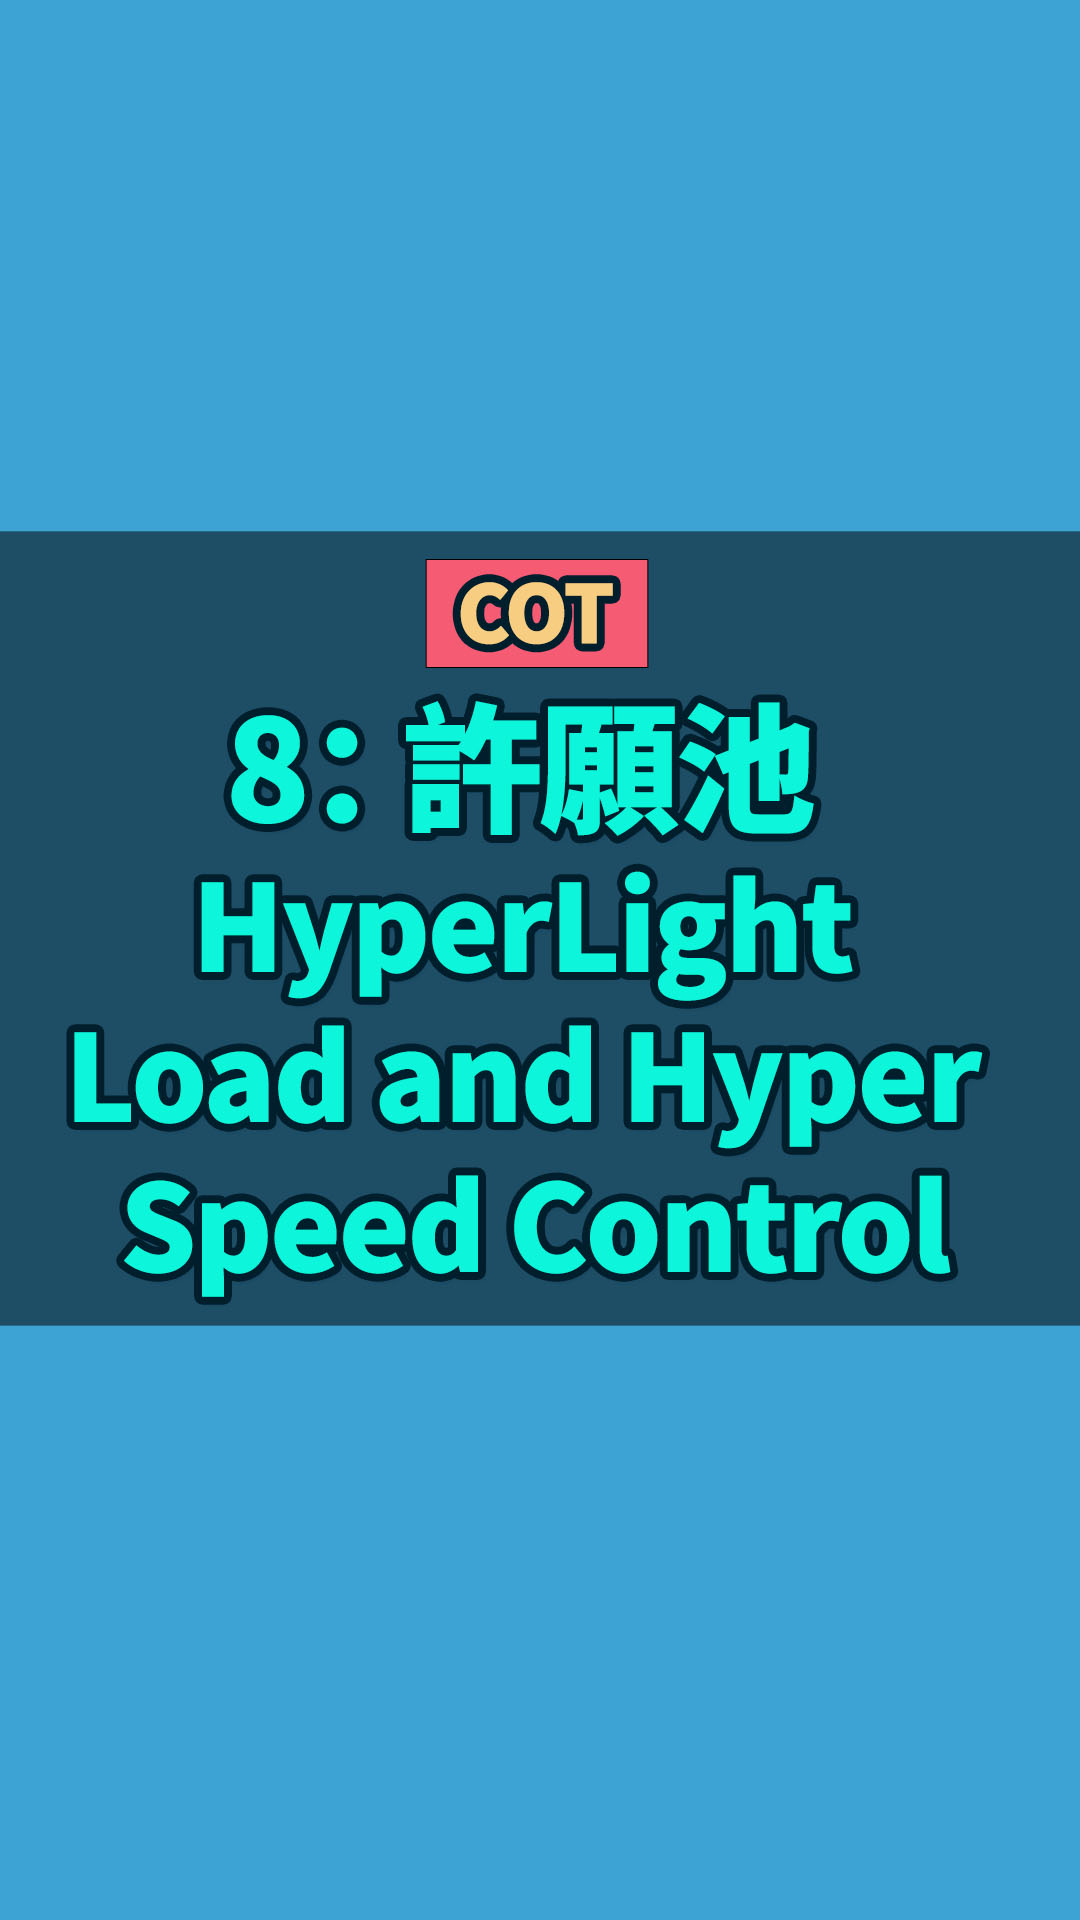 COT 8： 許願池 HyperLight Load and Hyper Speed Control